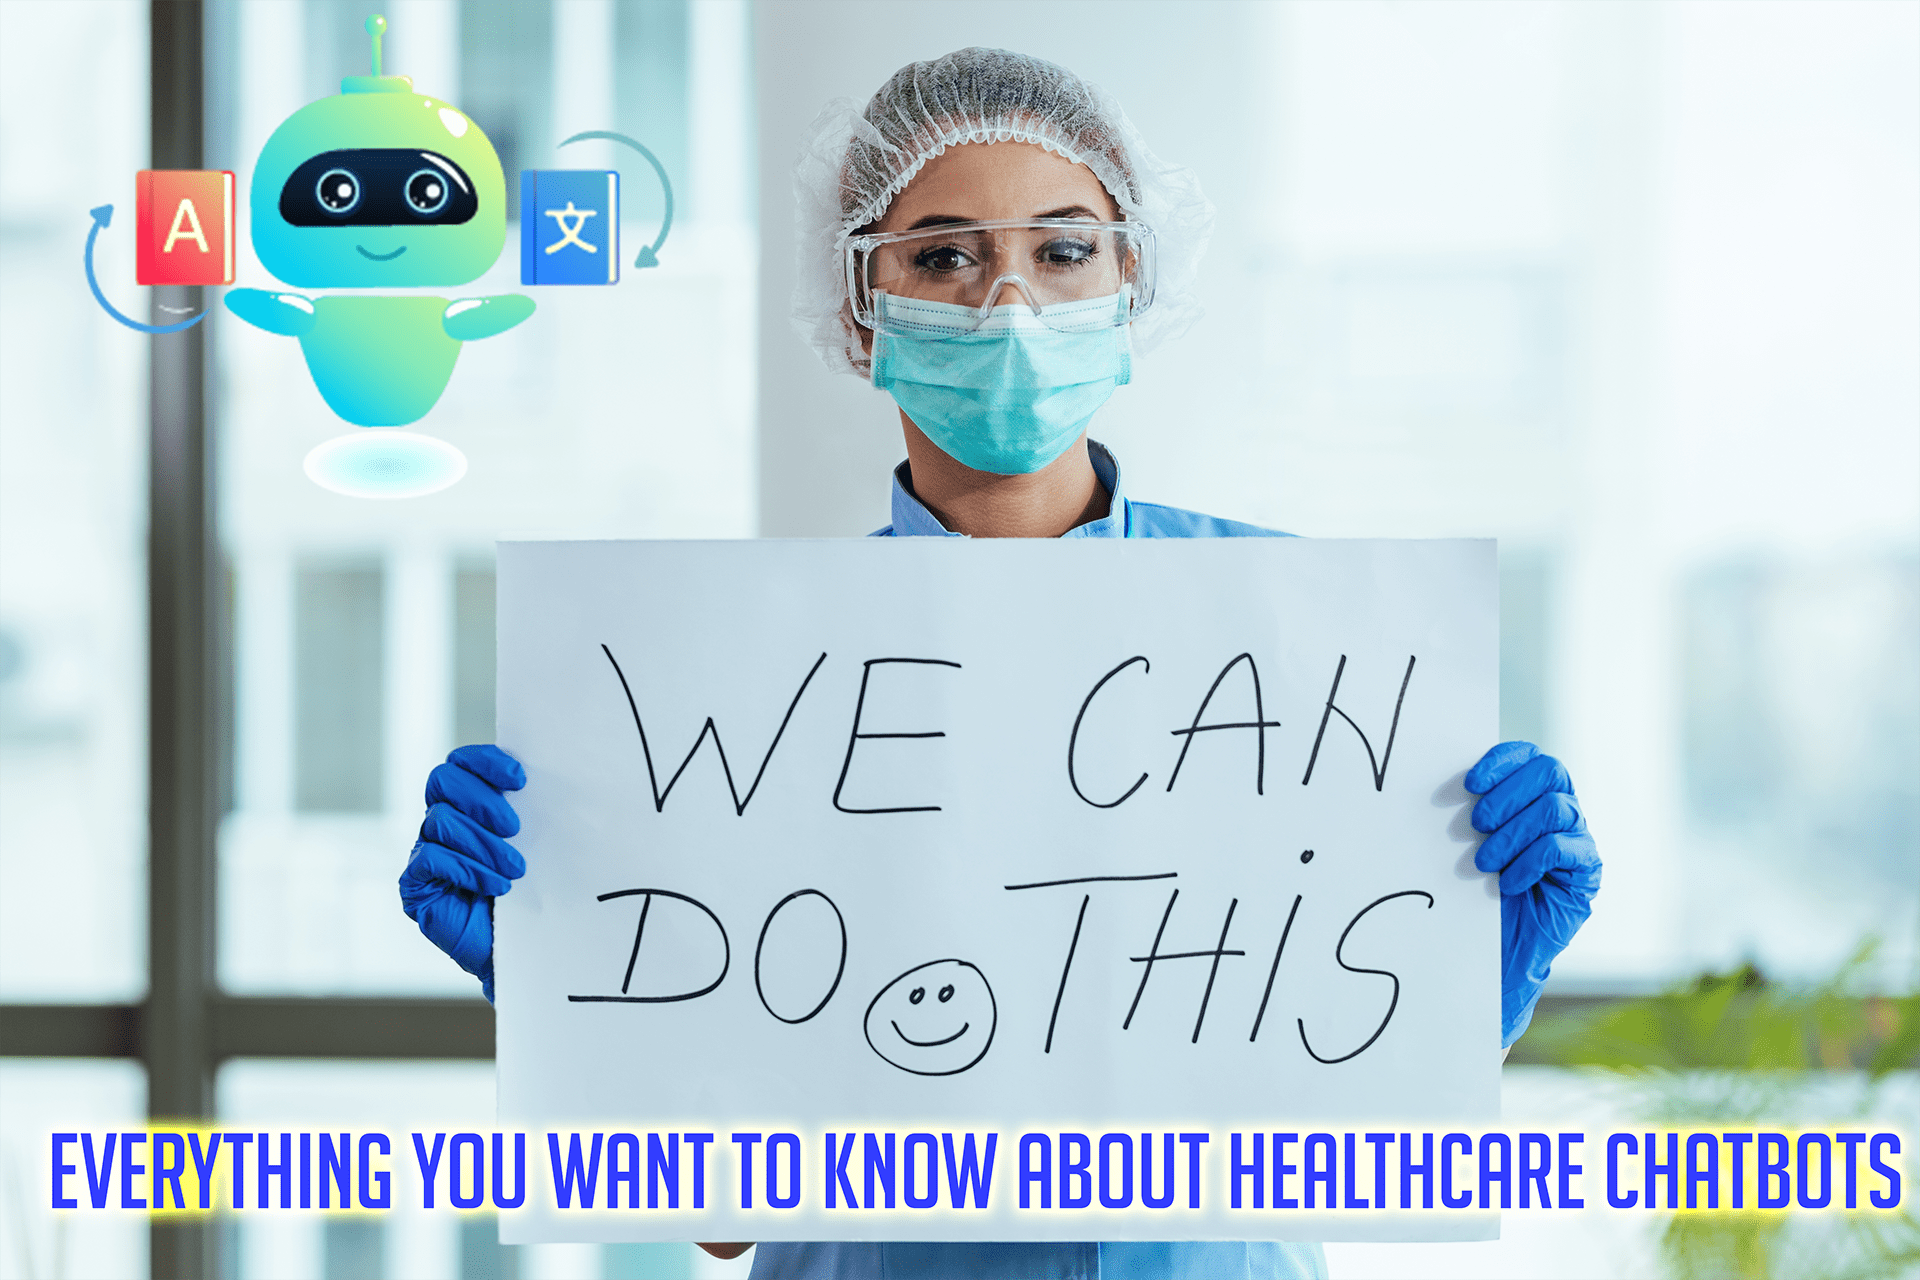 Everything You Want to Know About Healthcare Chatbots